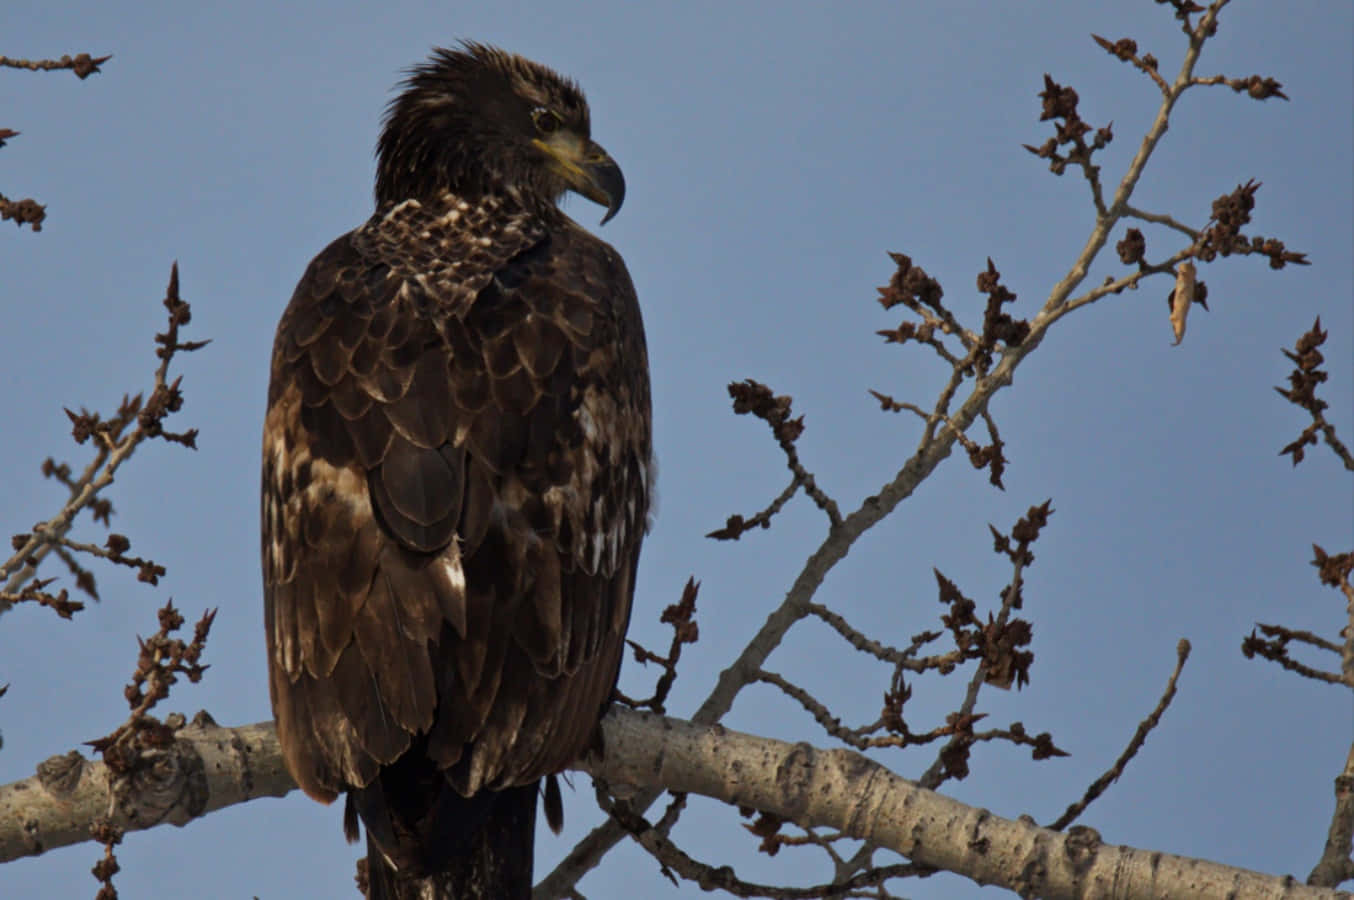 A majestic young Bald Eagle perched atop a tree